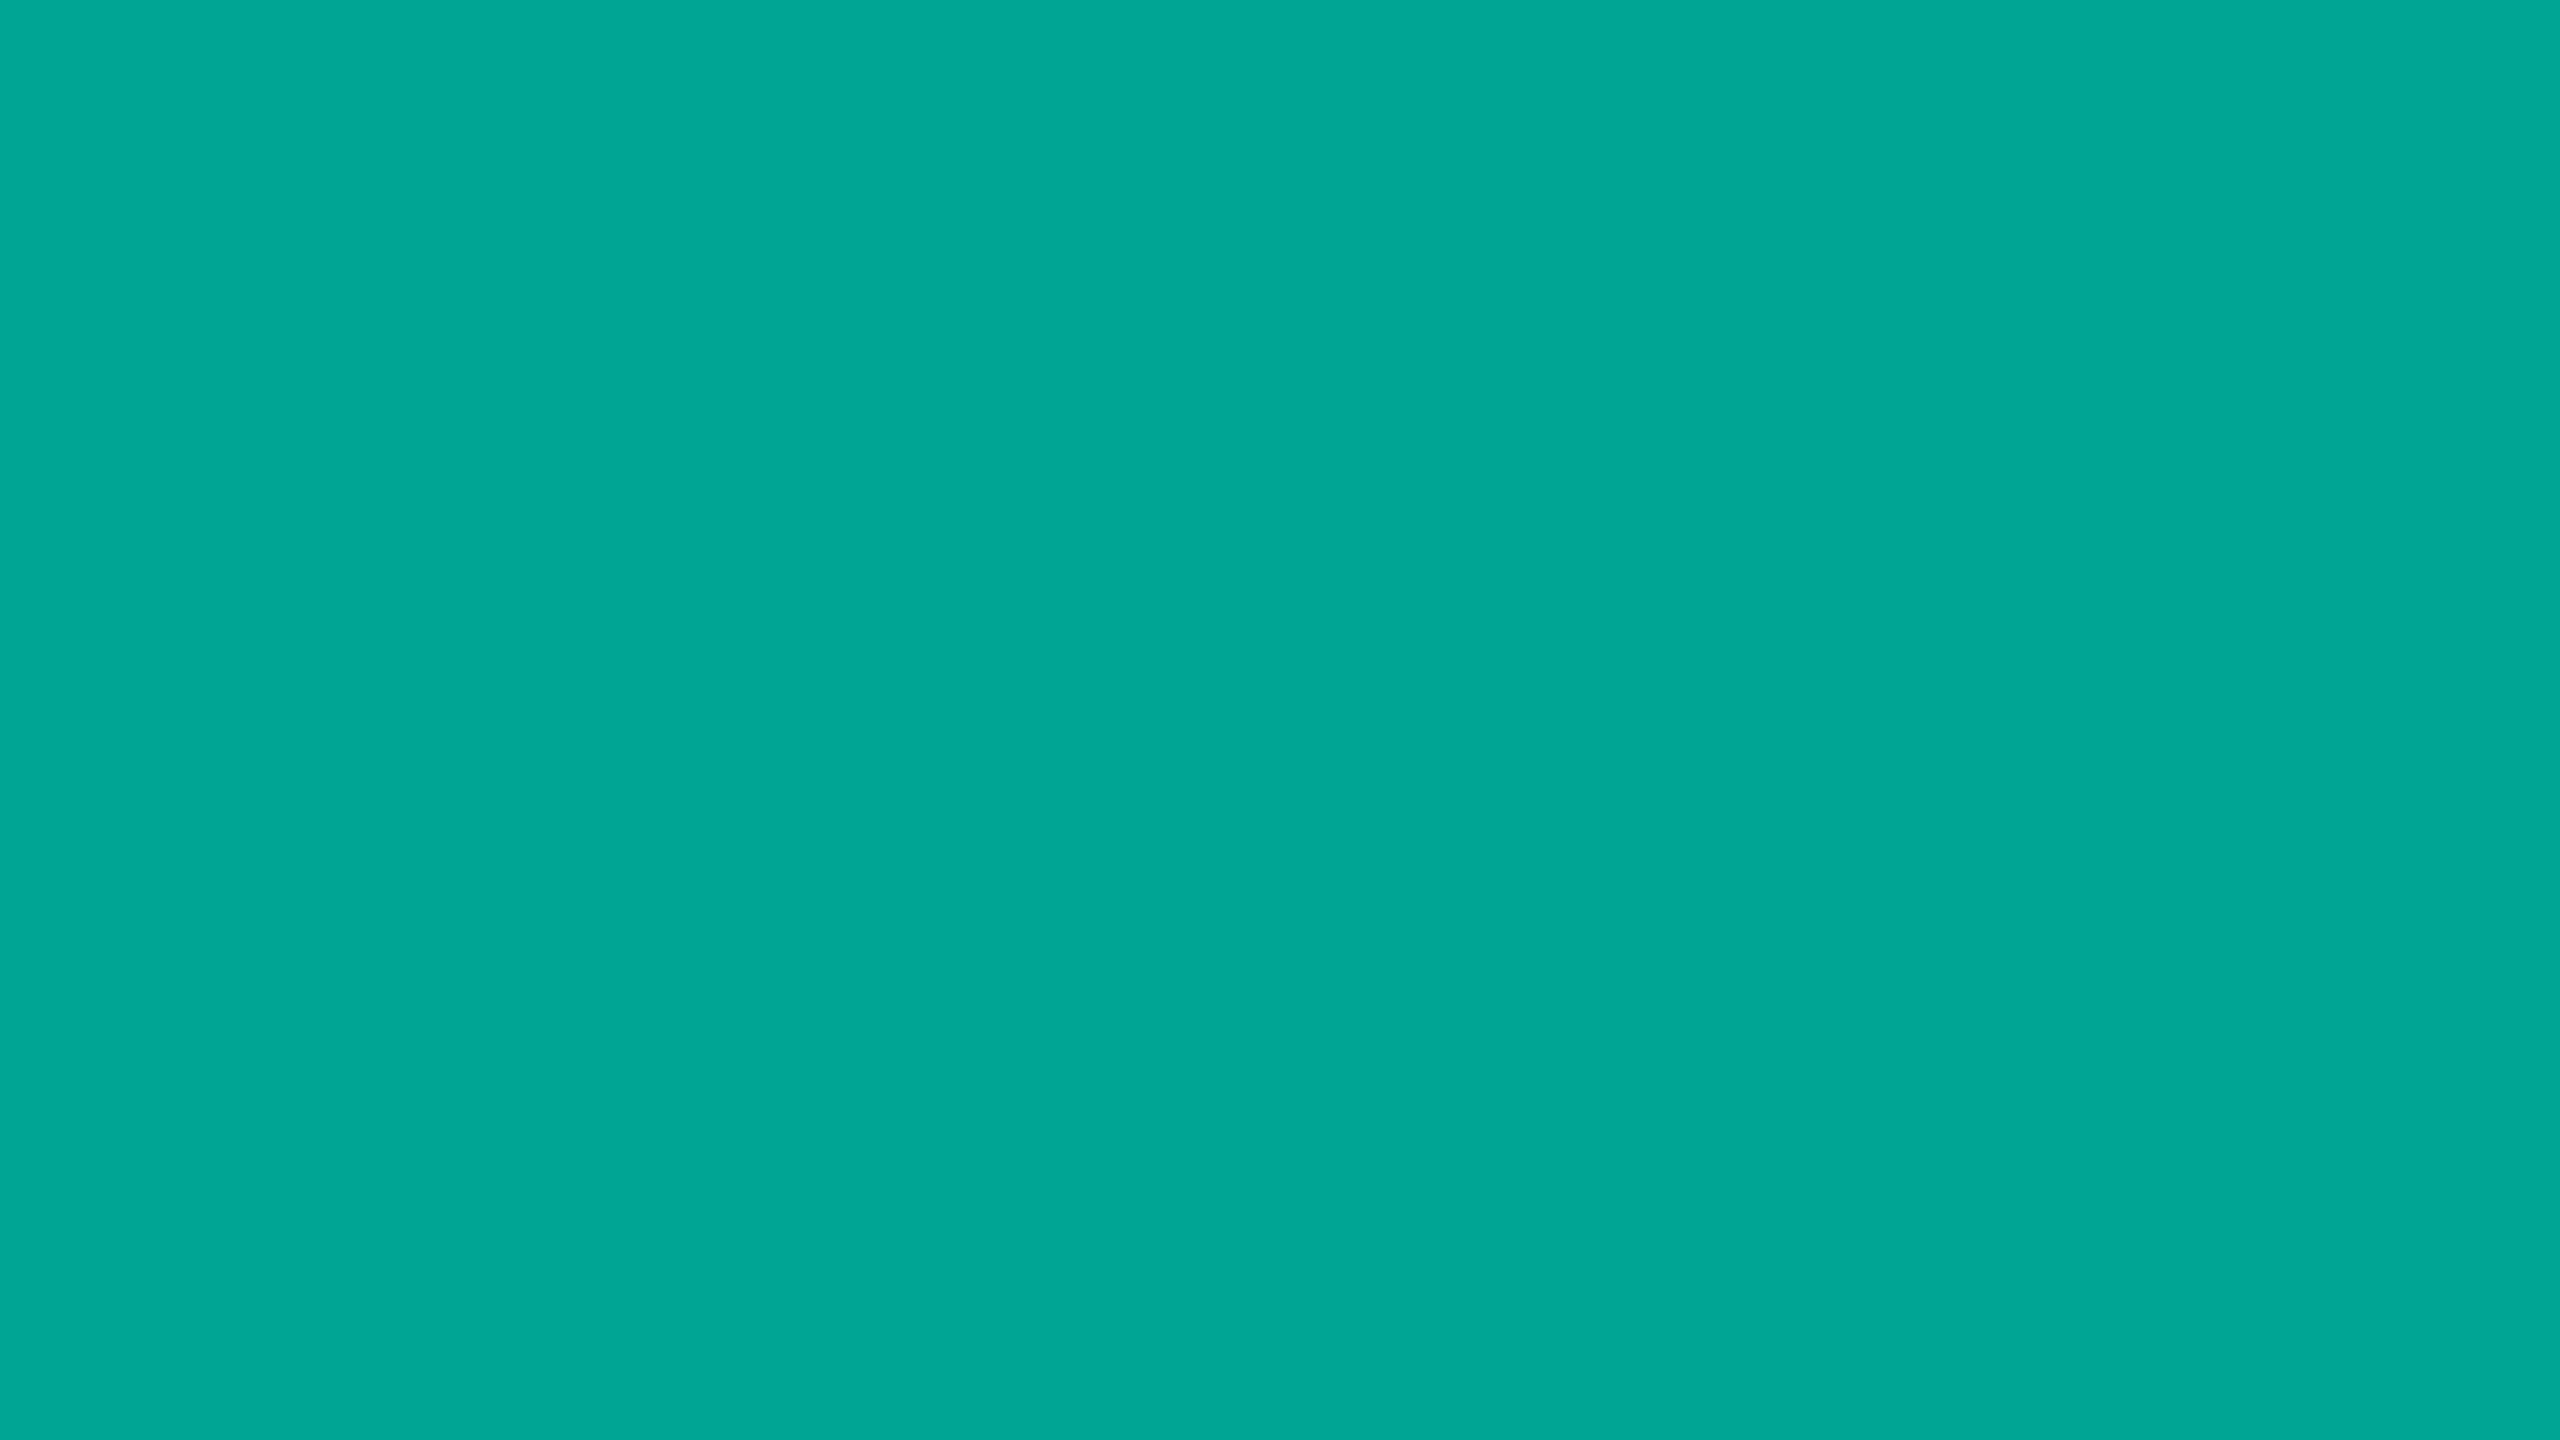 2560x1440 Persian Green Solid Color Background